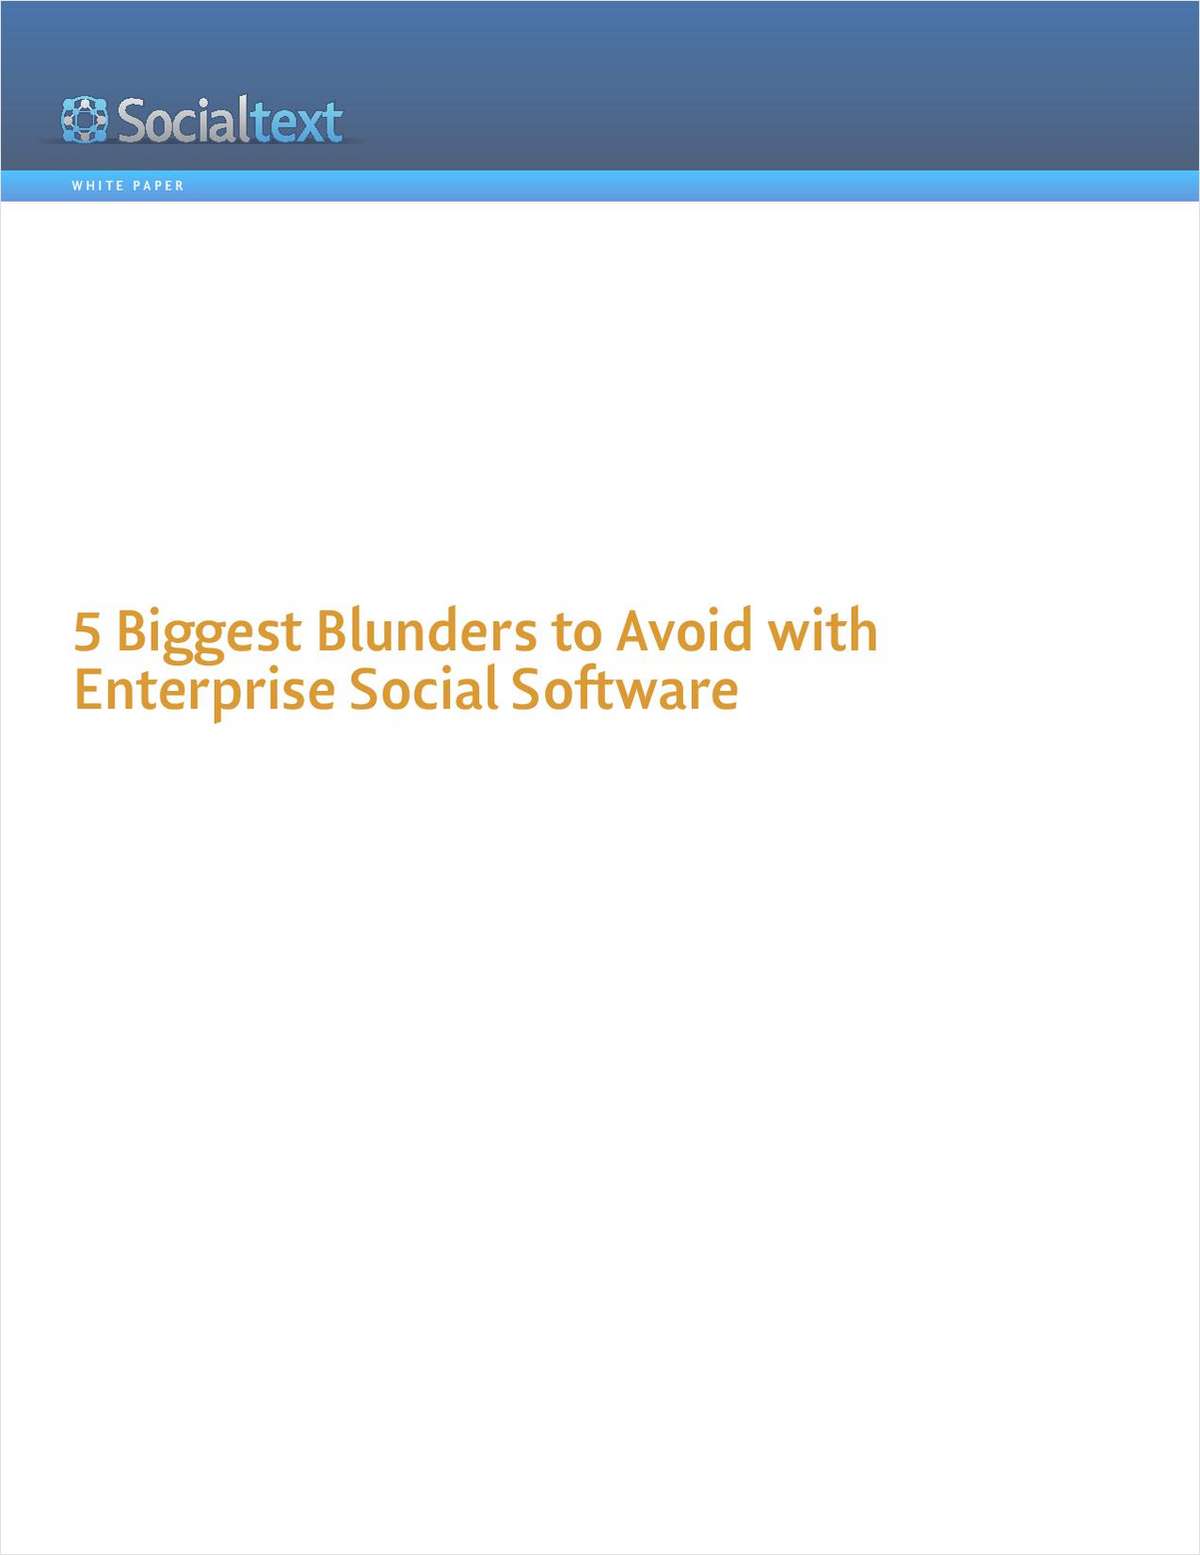 5 Biggest Blunders to Avoid with Enterprise Social Software